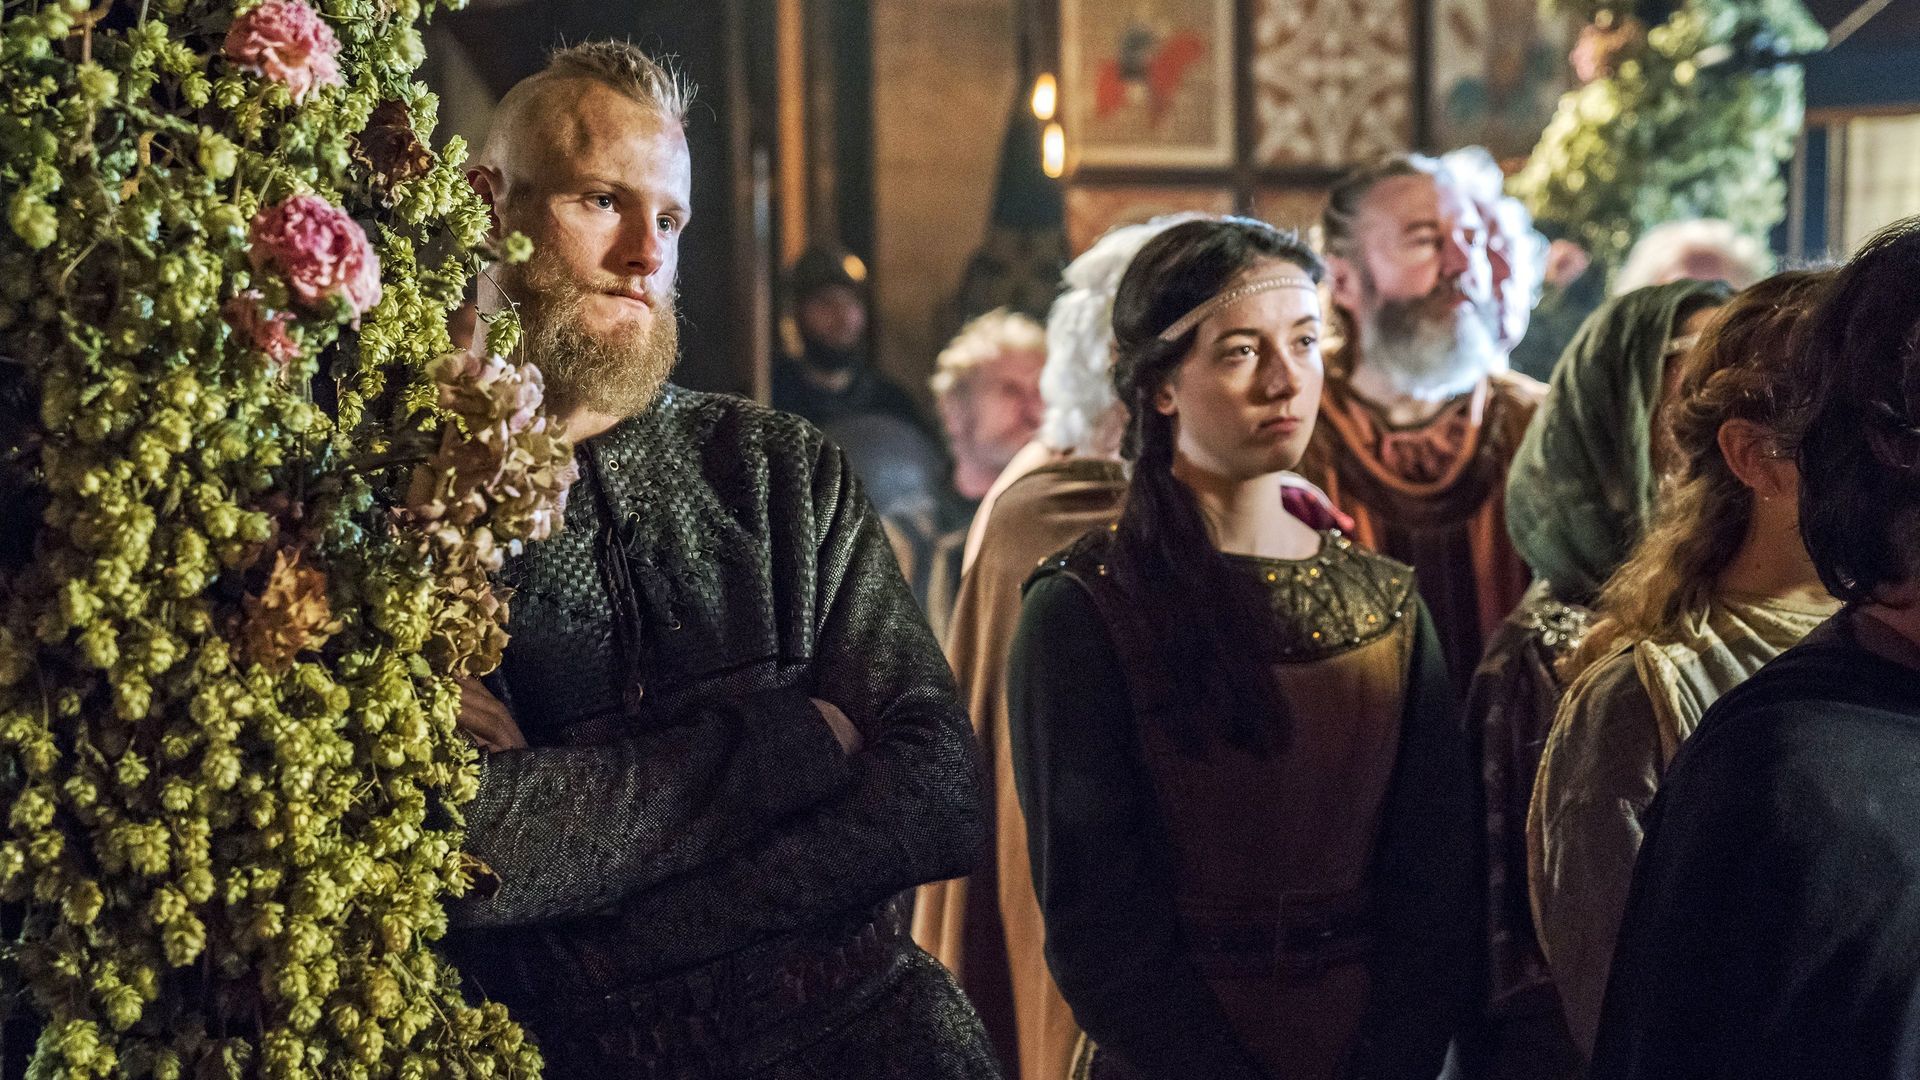 you are all beautiful — Vikings ep 5x13 (A New God)